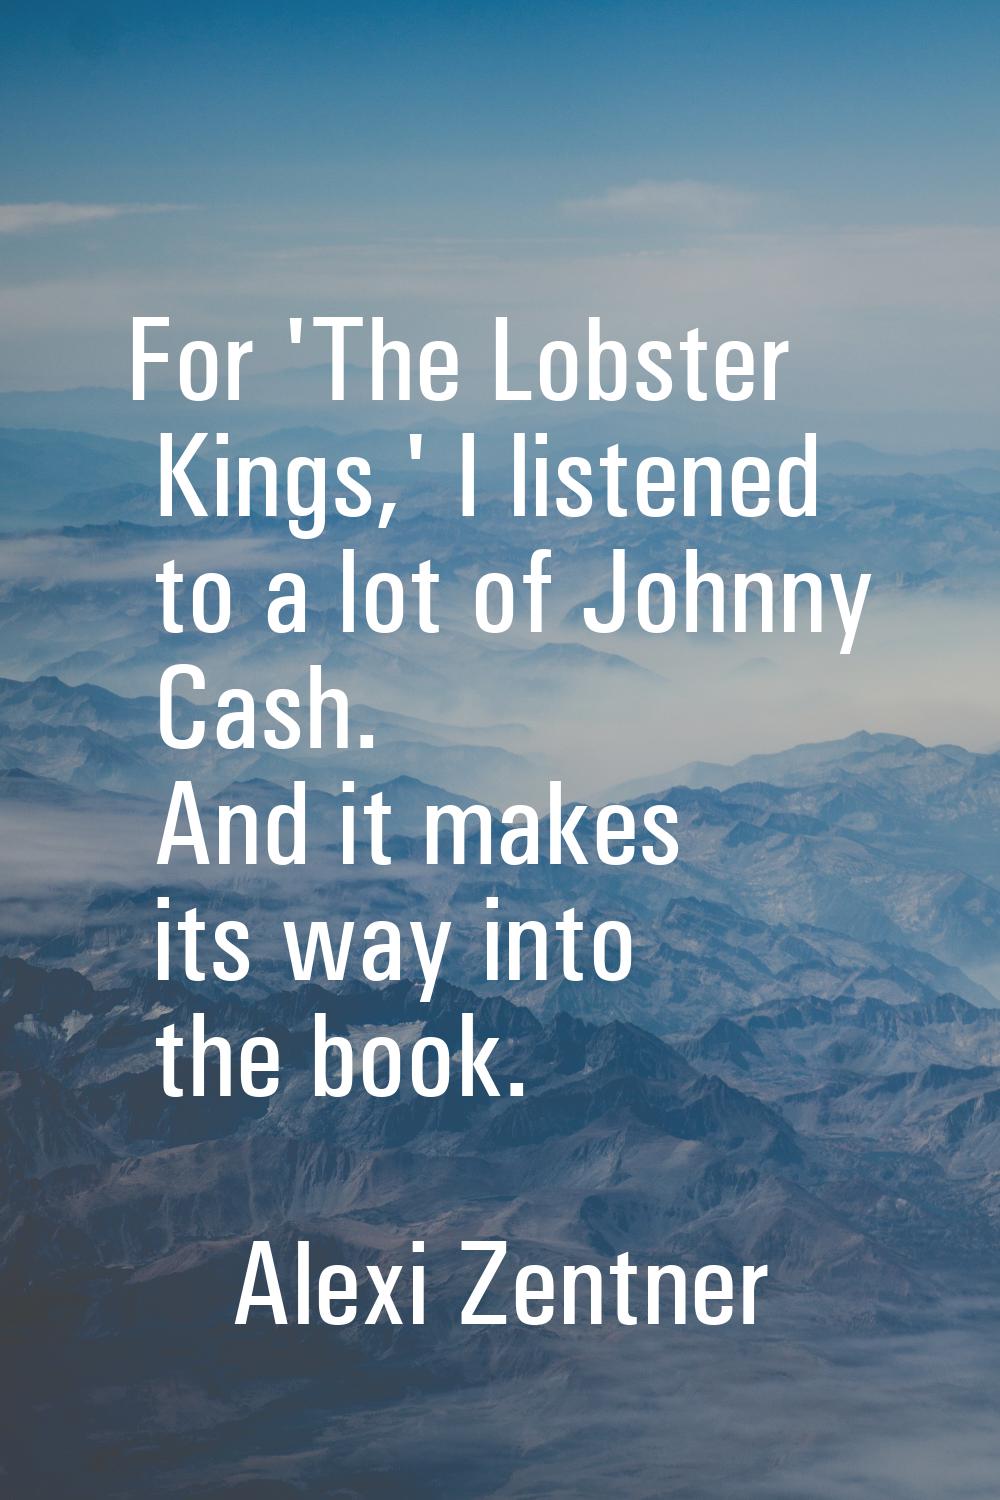 For 'The Lobster Kings,' I listened to a lot of Johnny Cash. And it makes its way into the book.